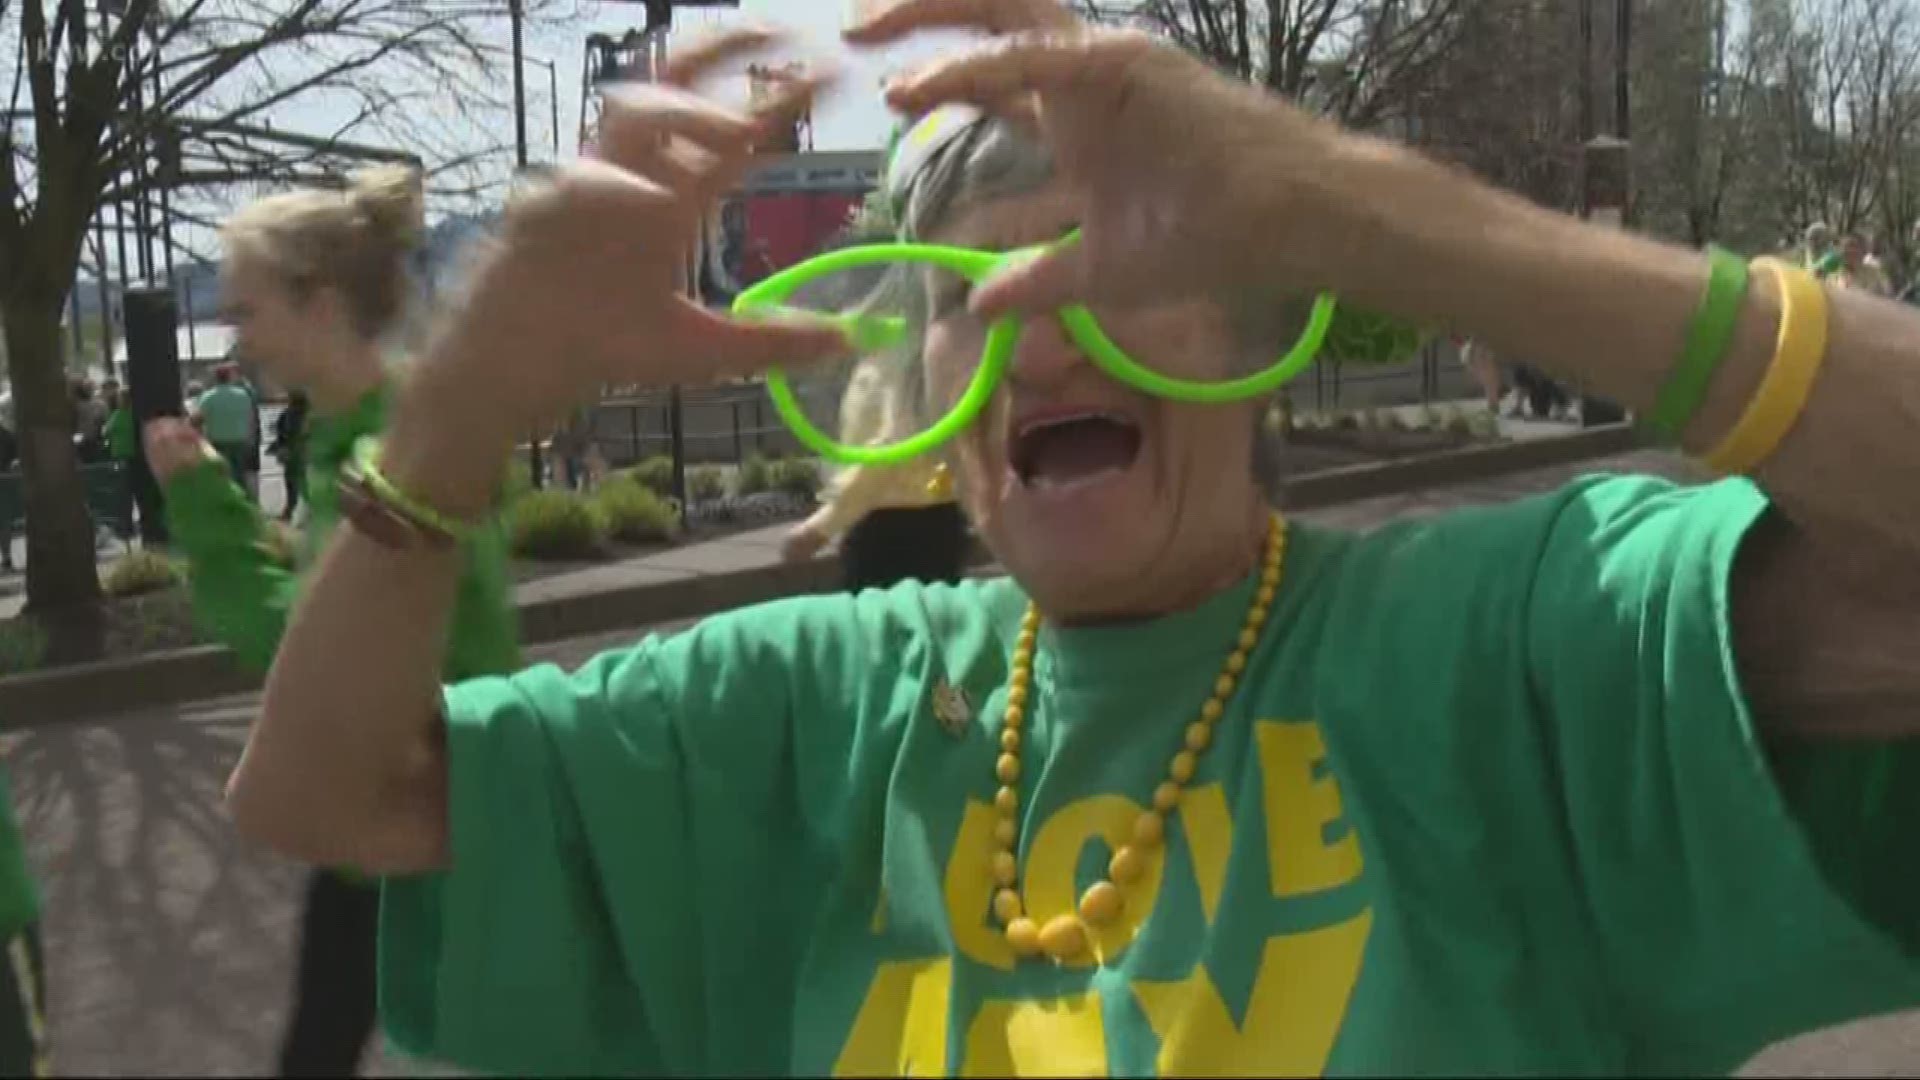 Oregon fans were ecstatic outside the Moda Center after the Ducks advanced to their first Final Four